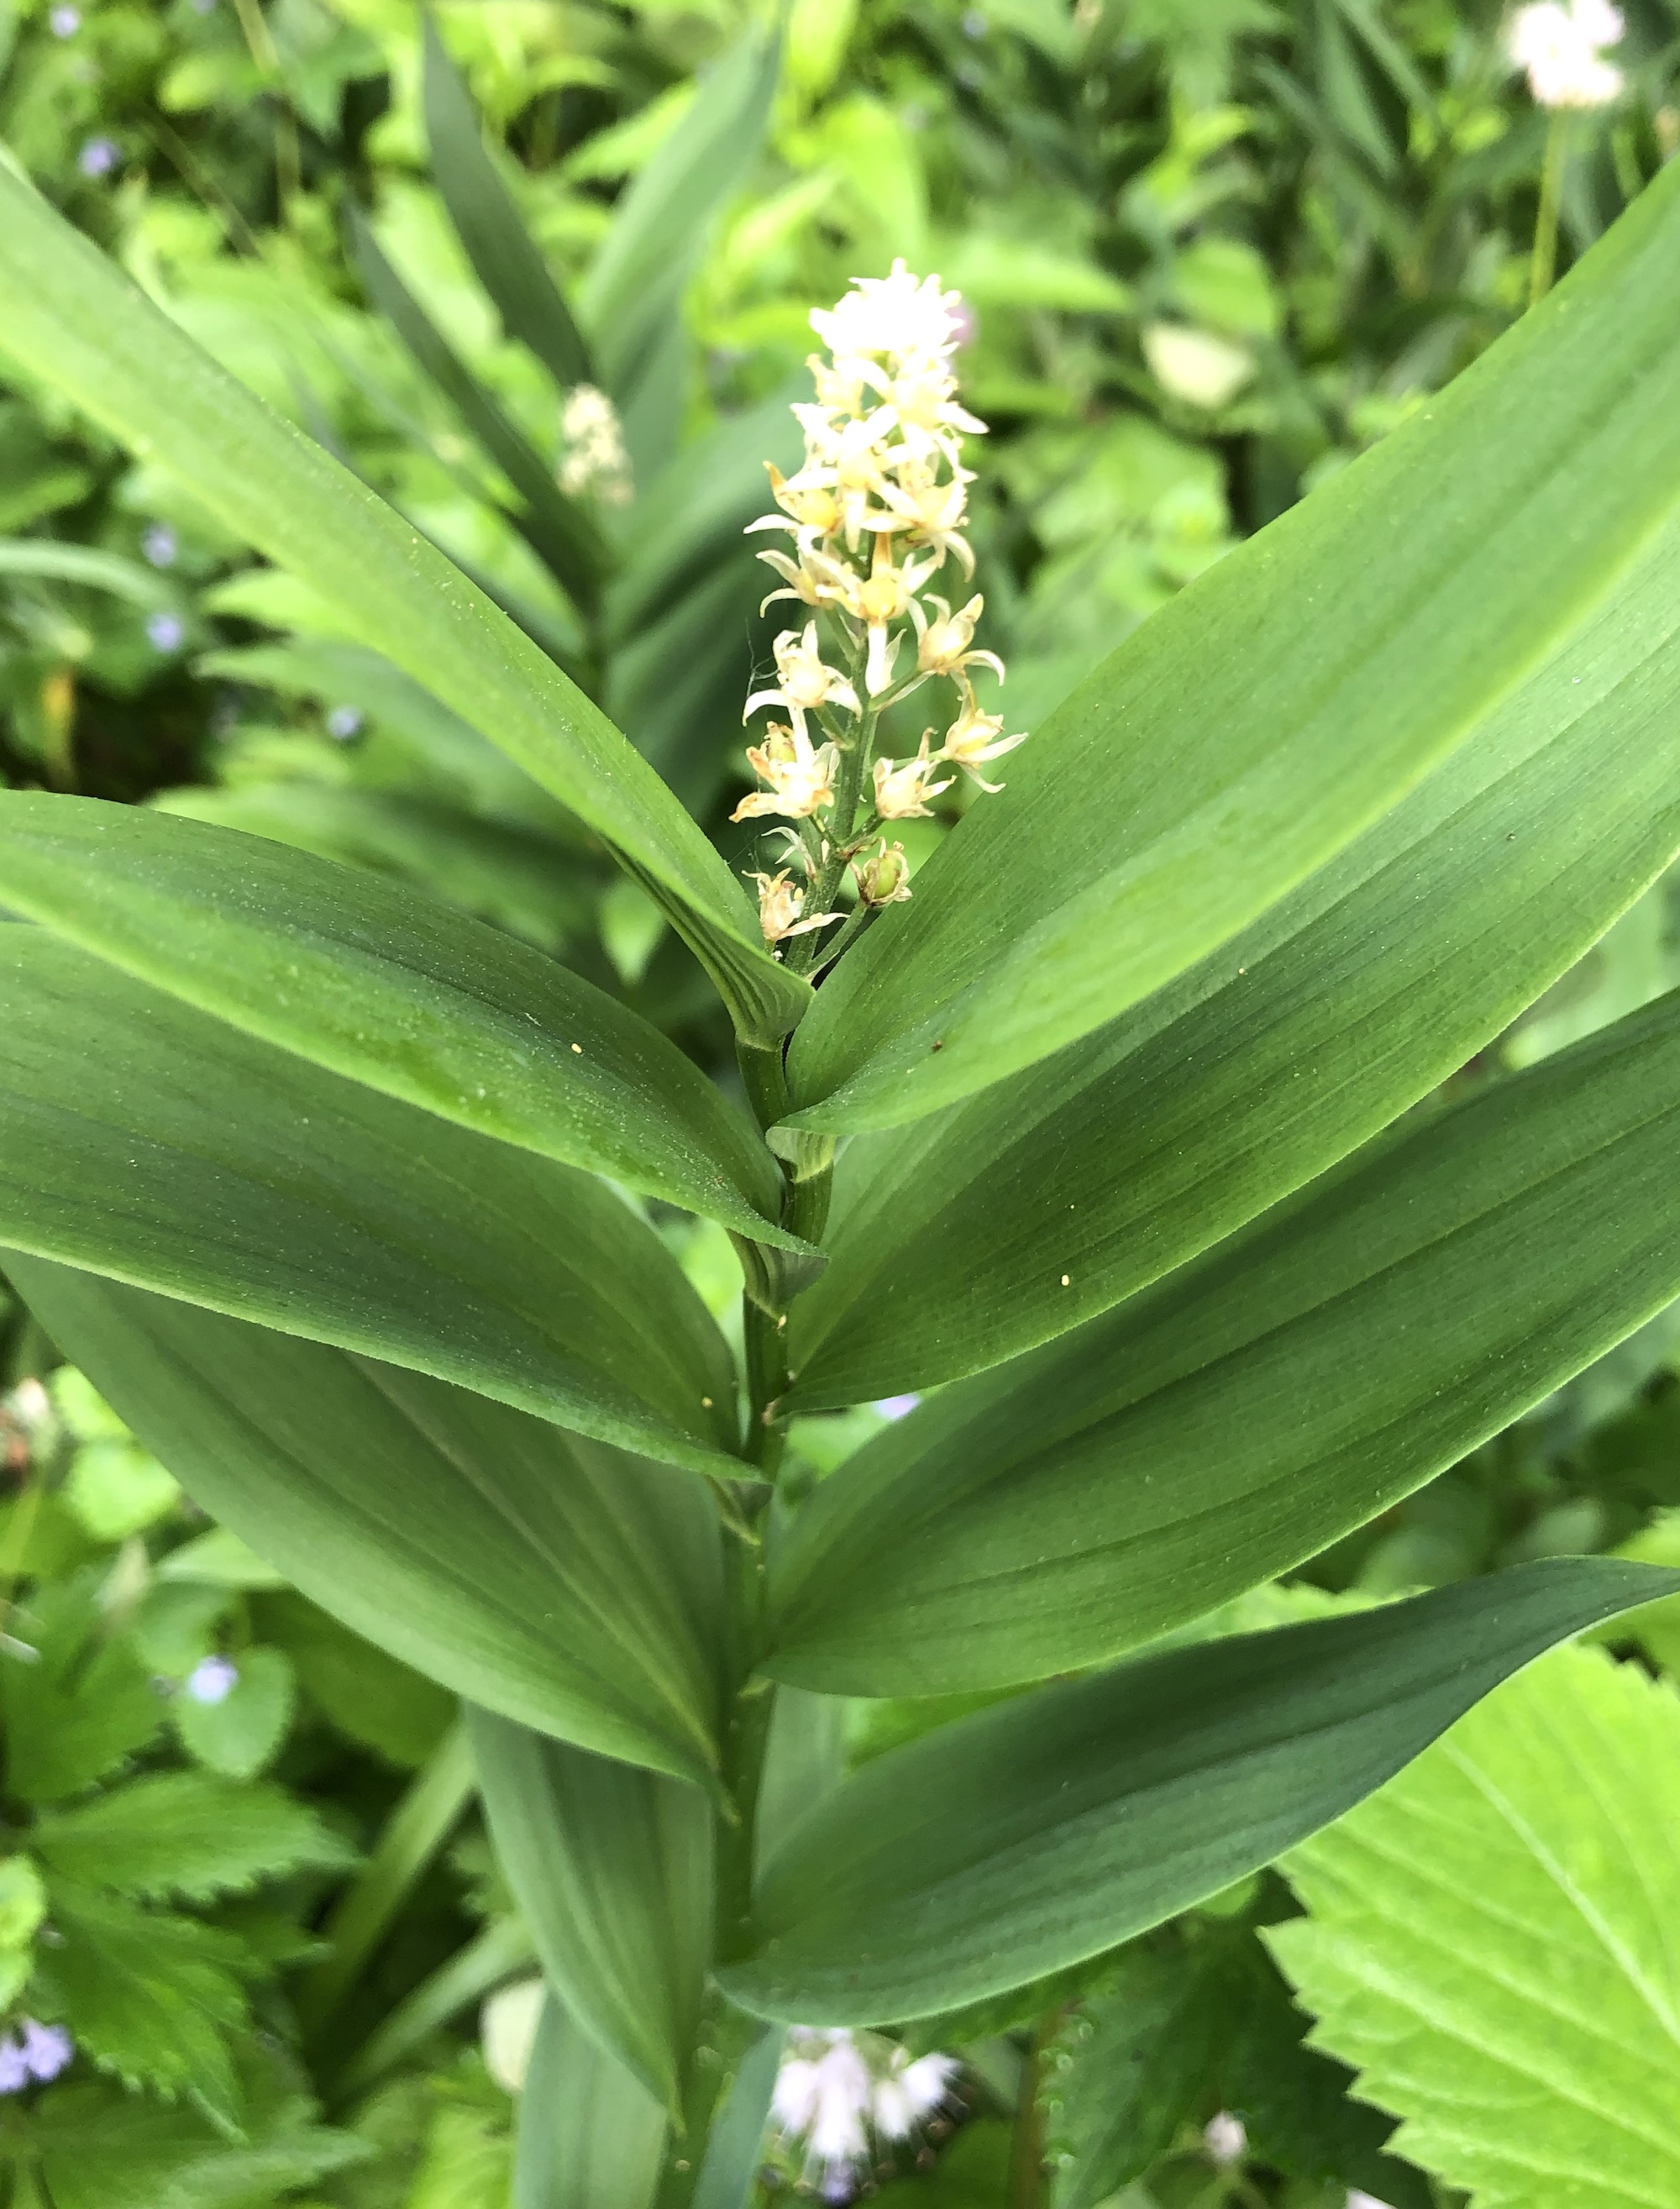 Starry False Solomon's Seal near Duck Pond in Madison, Wisconsin on May 31, 2019.